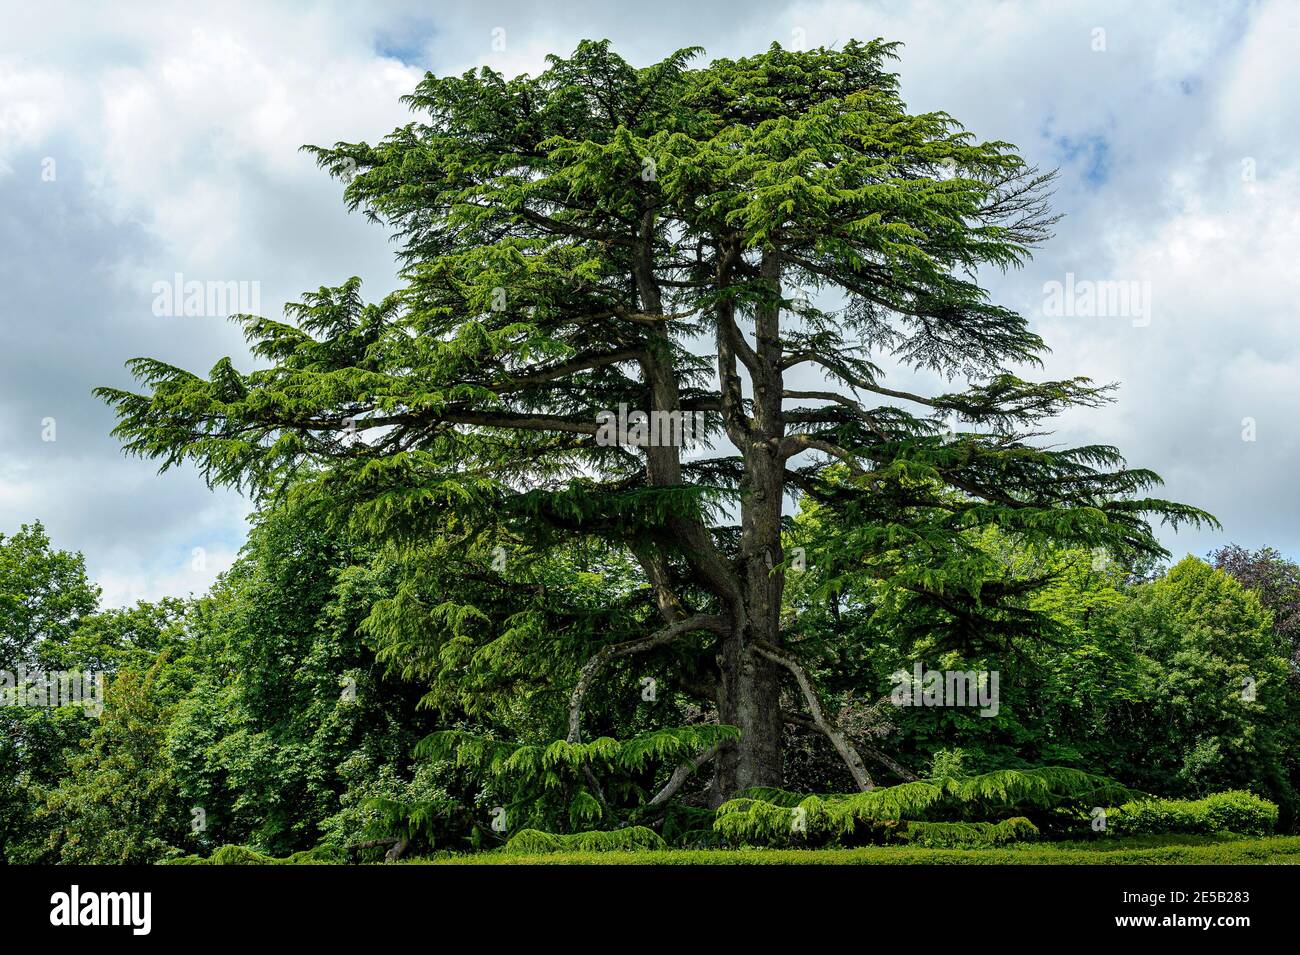 In a park in the southwest of France, a gigantic cedar tree occupies the center of the picture. The lowest branches crawl at ground level. Stock Photo